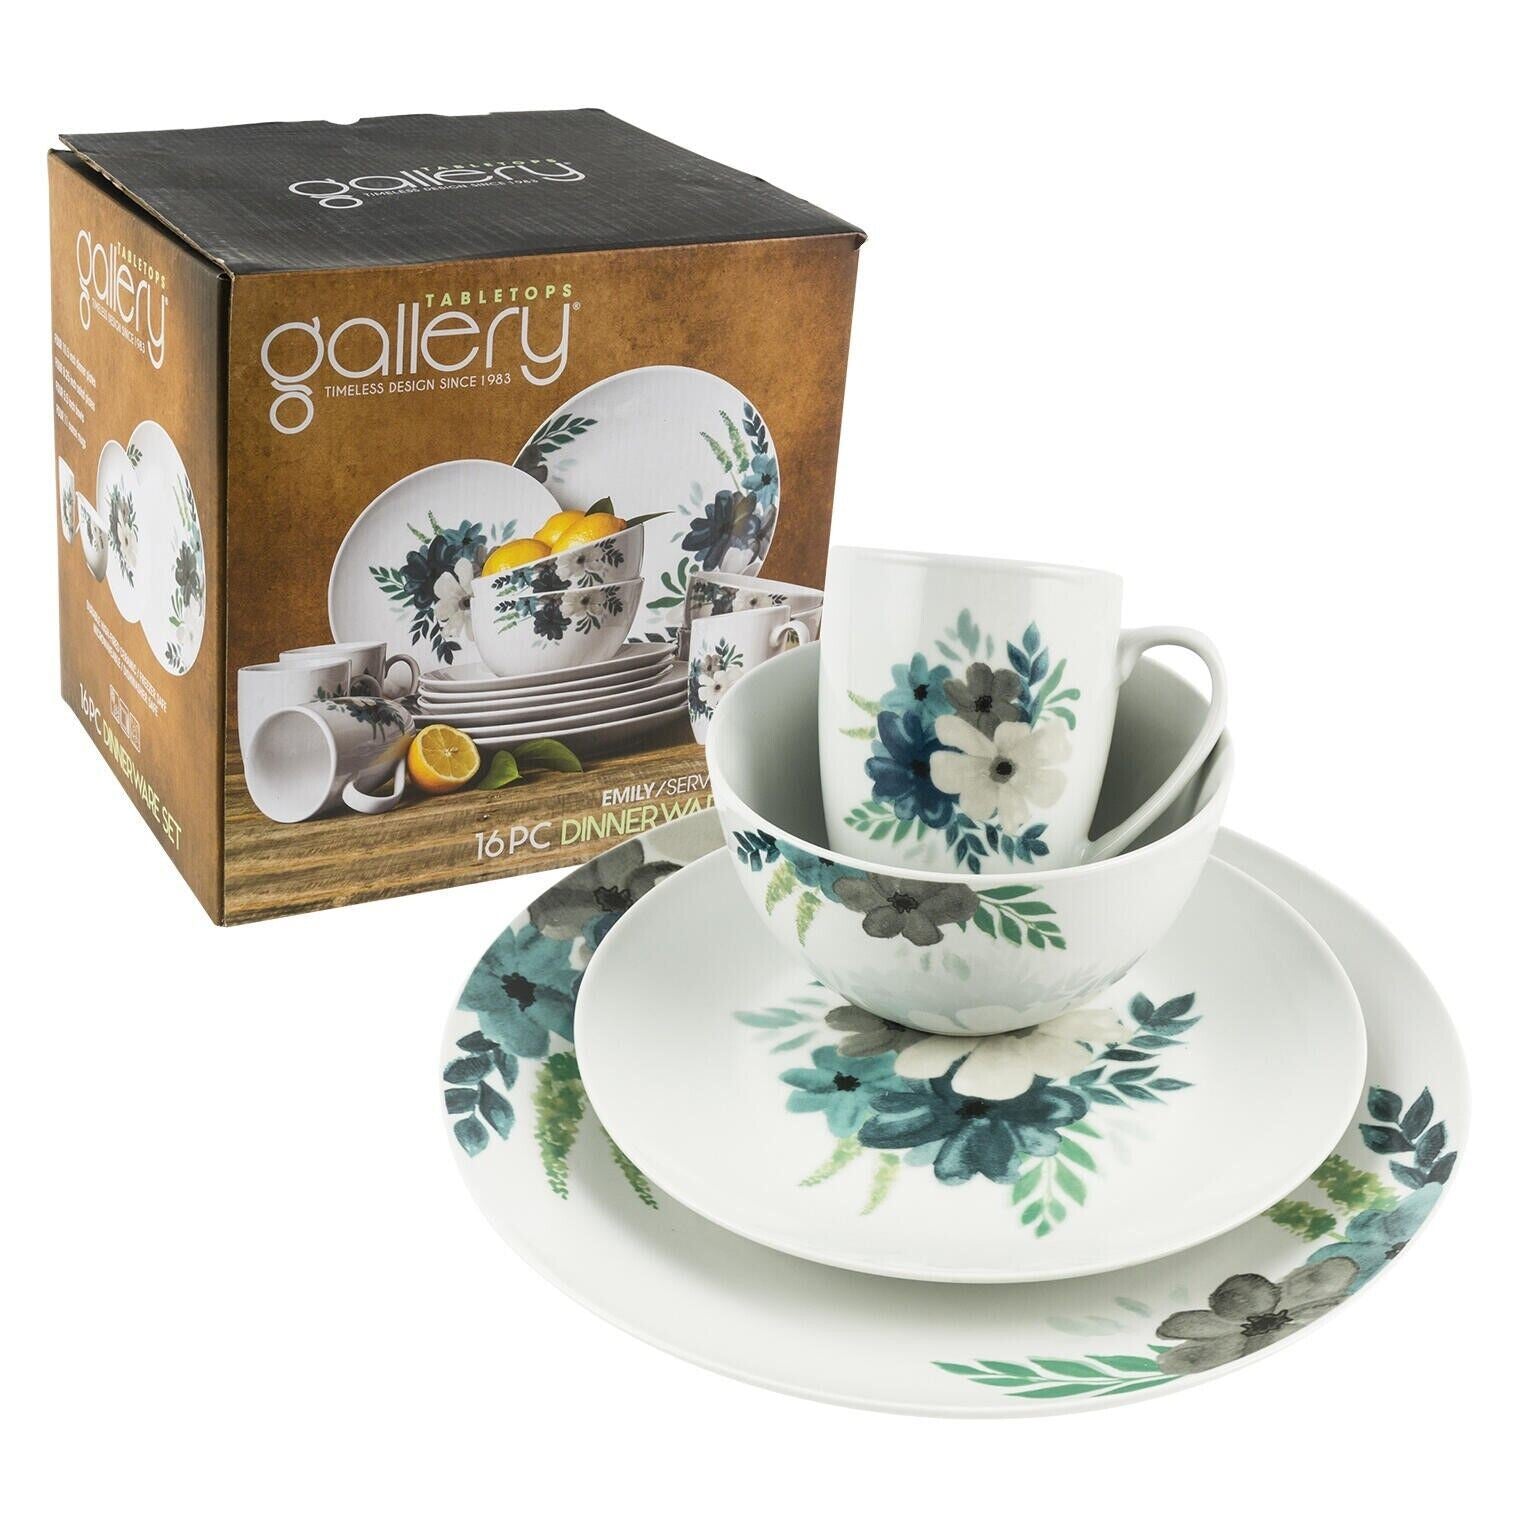 This Dinnerware 16 Piece Tabletops Gallery Emily Flower Design Everyday Casual Round is made with love by Premier Homegoods! Shop more unique gift ideas today with Spots Initiatives, the best way to support creators.